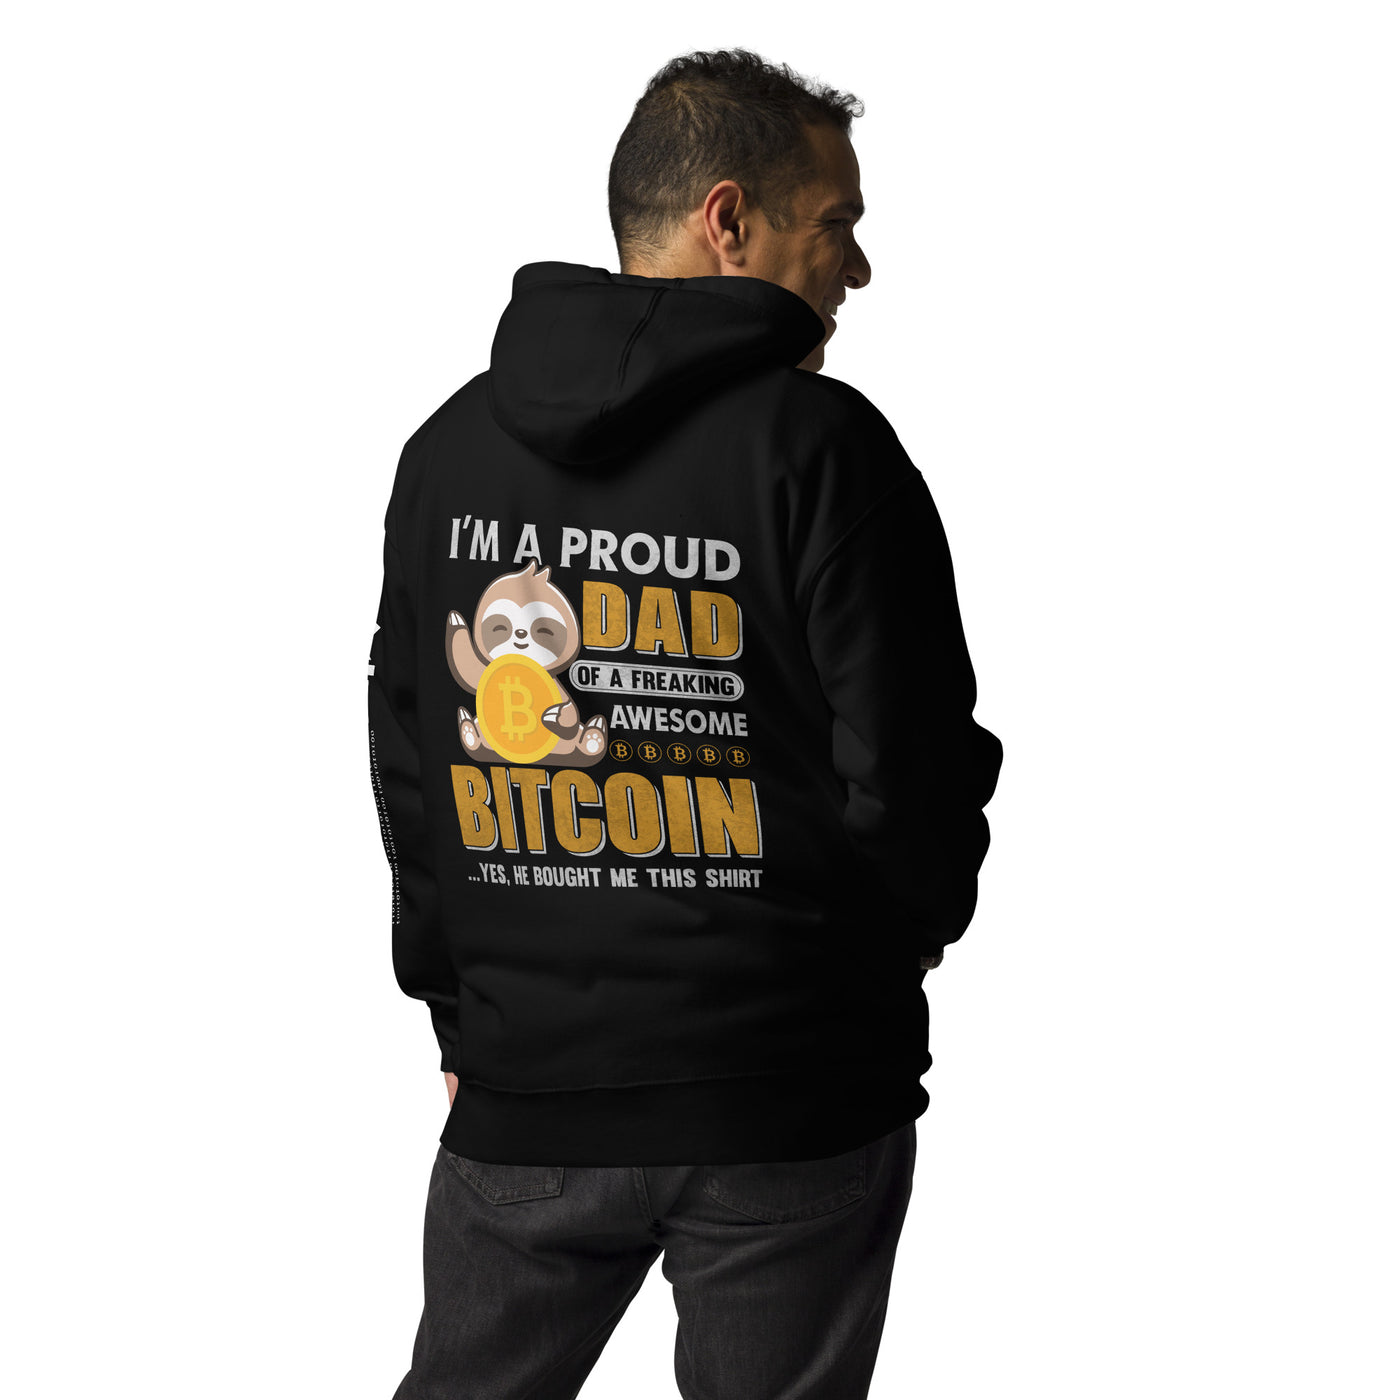 I am a Proud Dad of Bitcoin - Unisex Hoodie  ( Back Print )